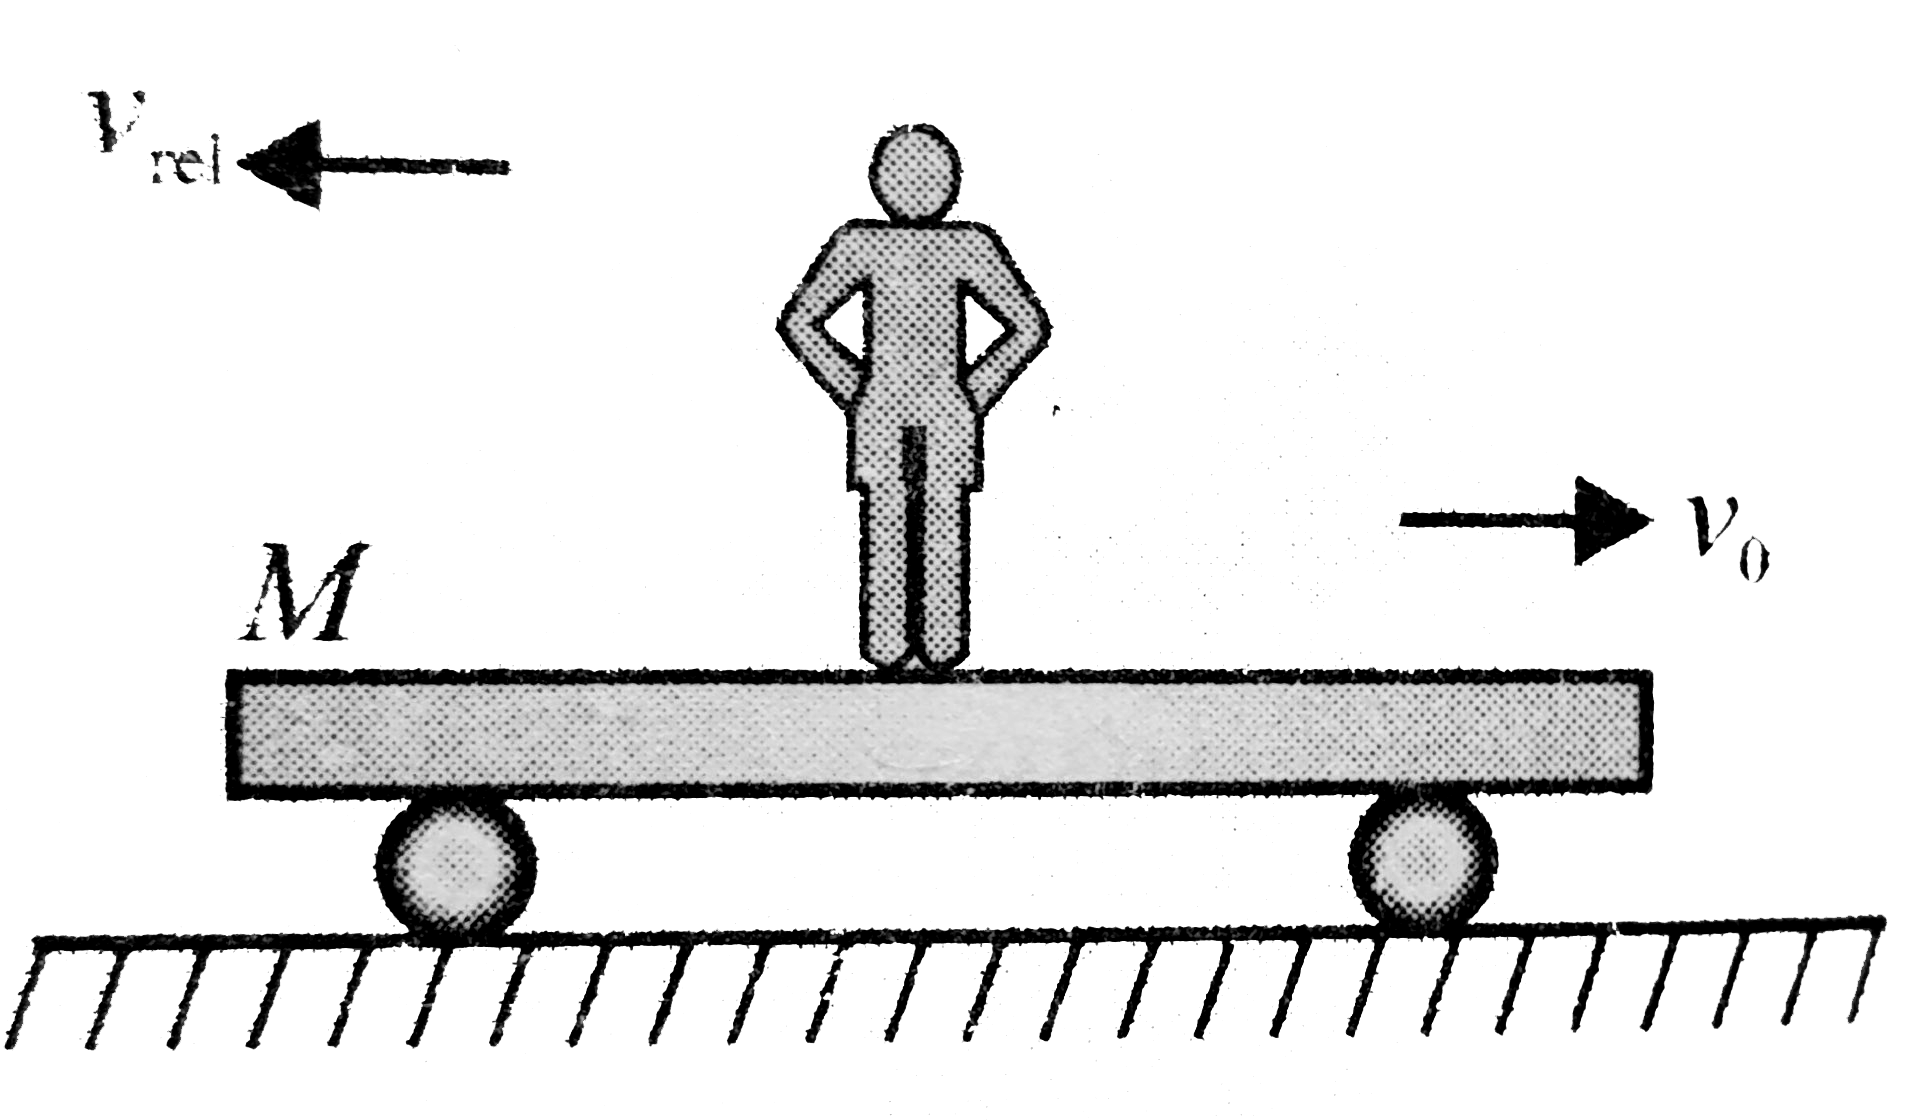 a. A rail road flat car of mass M can roll without friction along a straight horizontal track . Initially, a man of mass m is standing on the car which is moving to the right with speed v(0). What is the change in velocity of the car if the man runs to the left so that his speed relative to the car is v(rel) just before he jumps off at the left end?   b. If there are n men each of mass m on the car, should they all run and jump off together or should they run and jump one by one in order to give a greater velocity to the car?